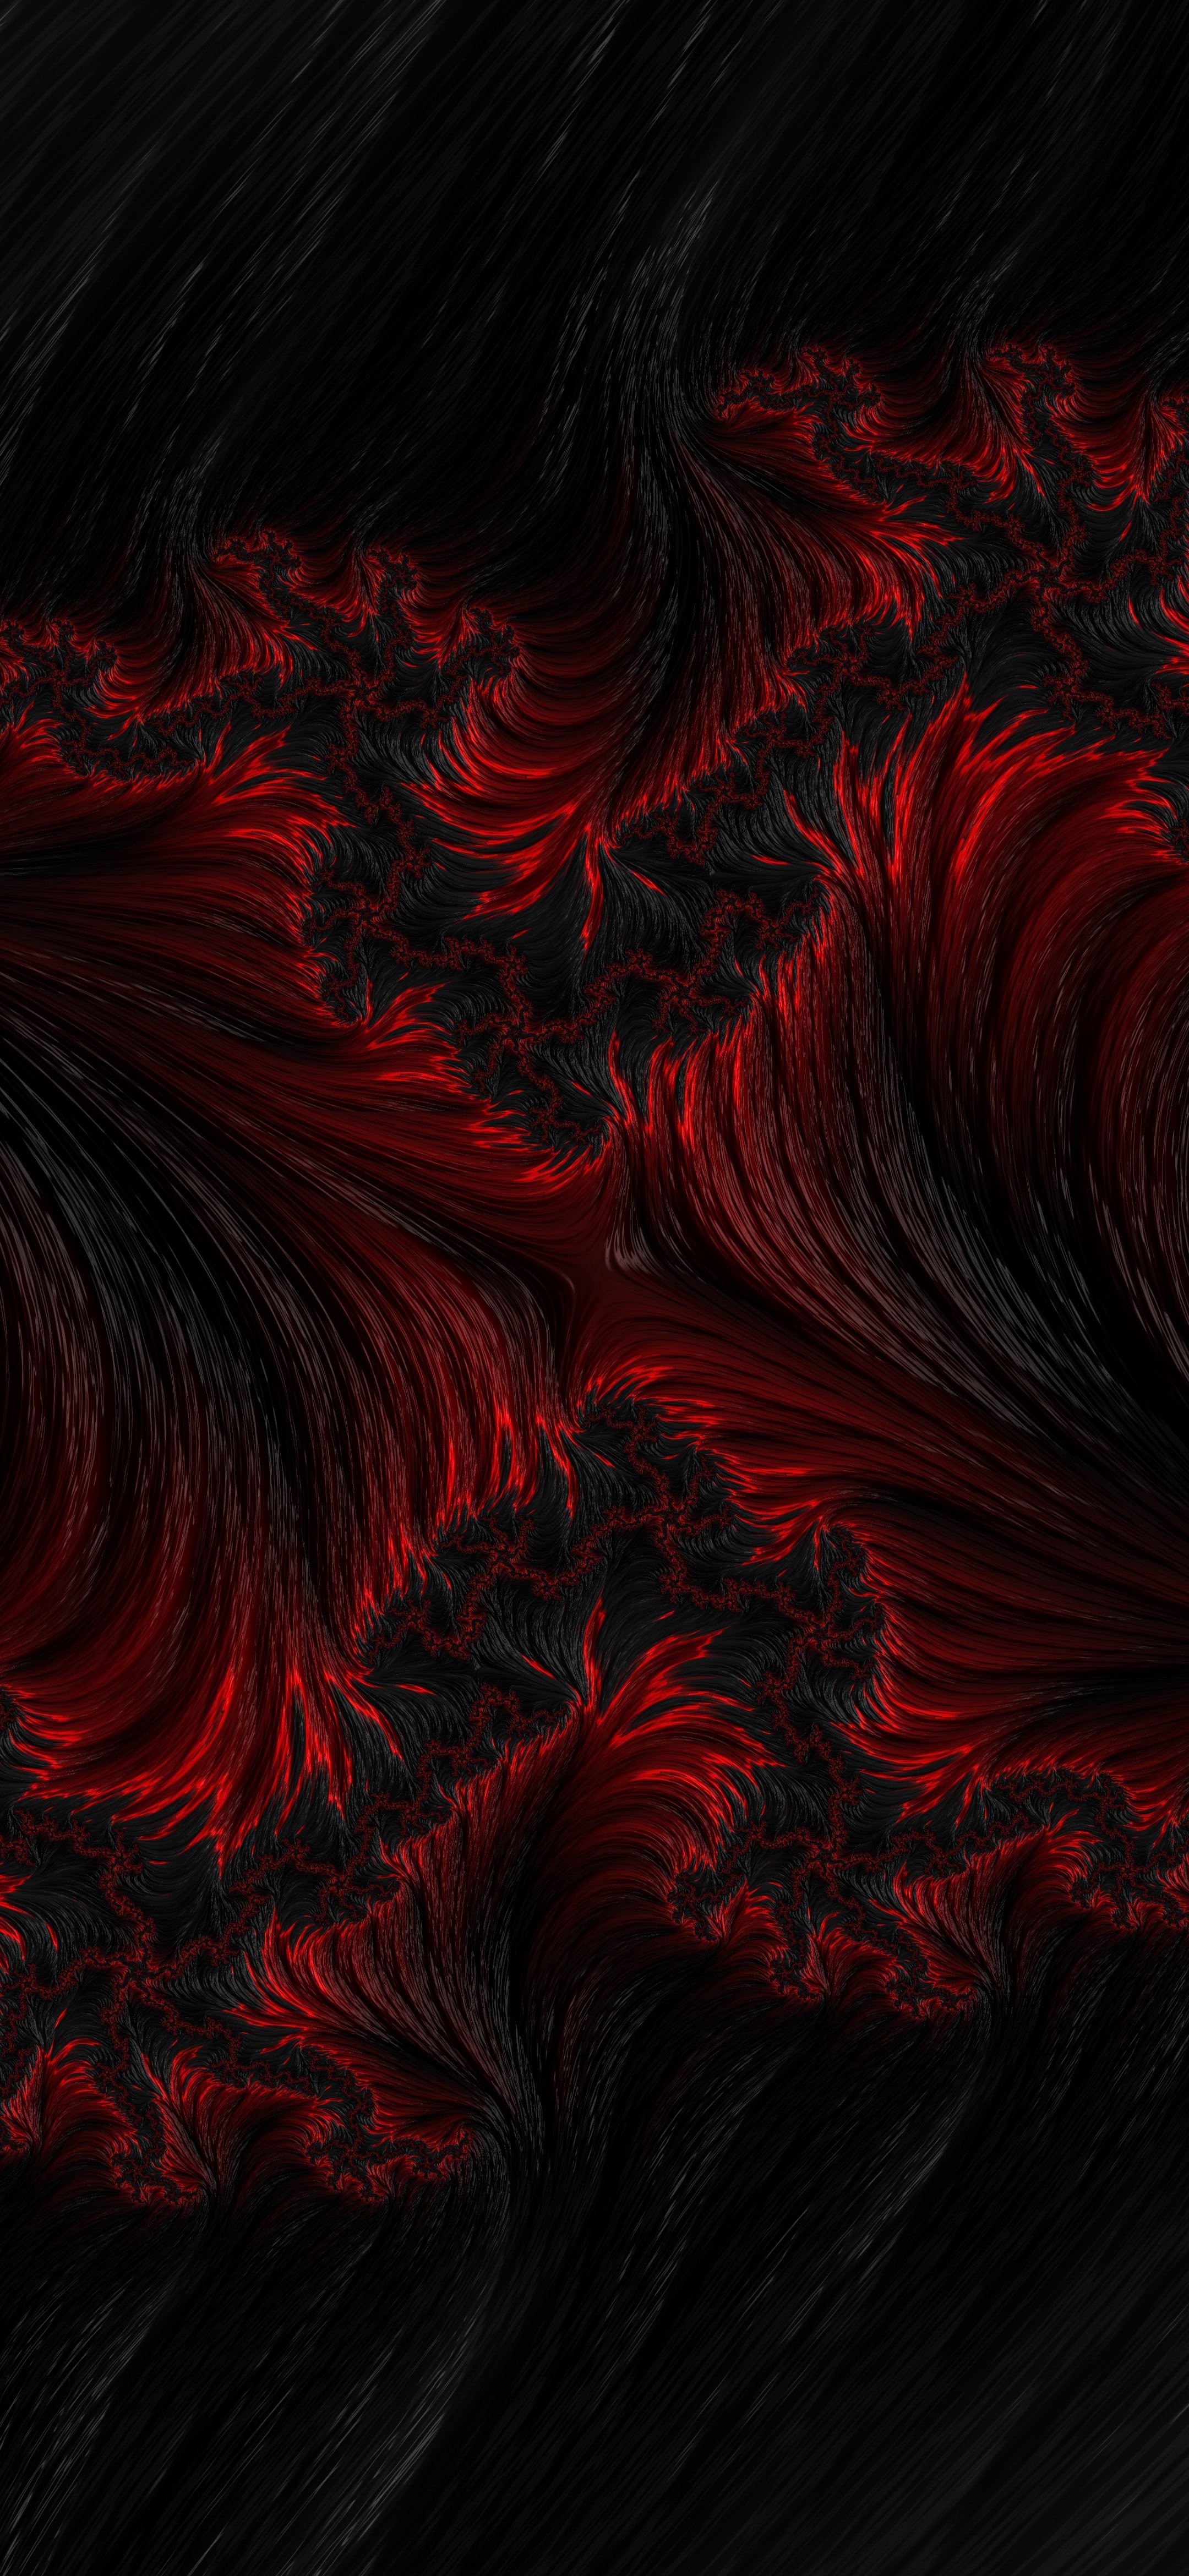 wavy, black, abstract, red, fractal Full HD